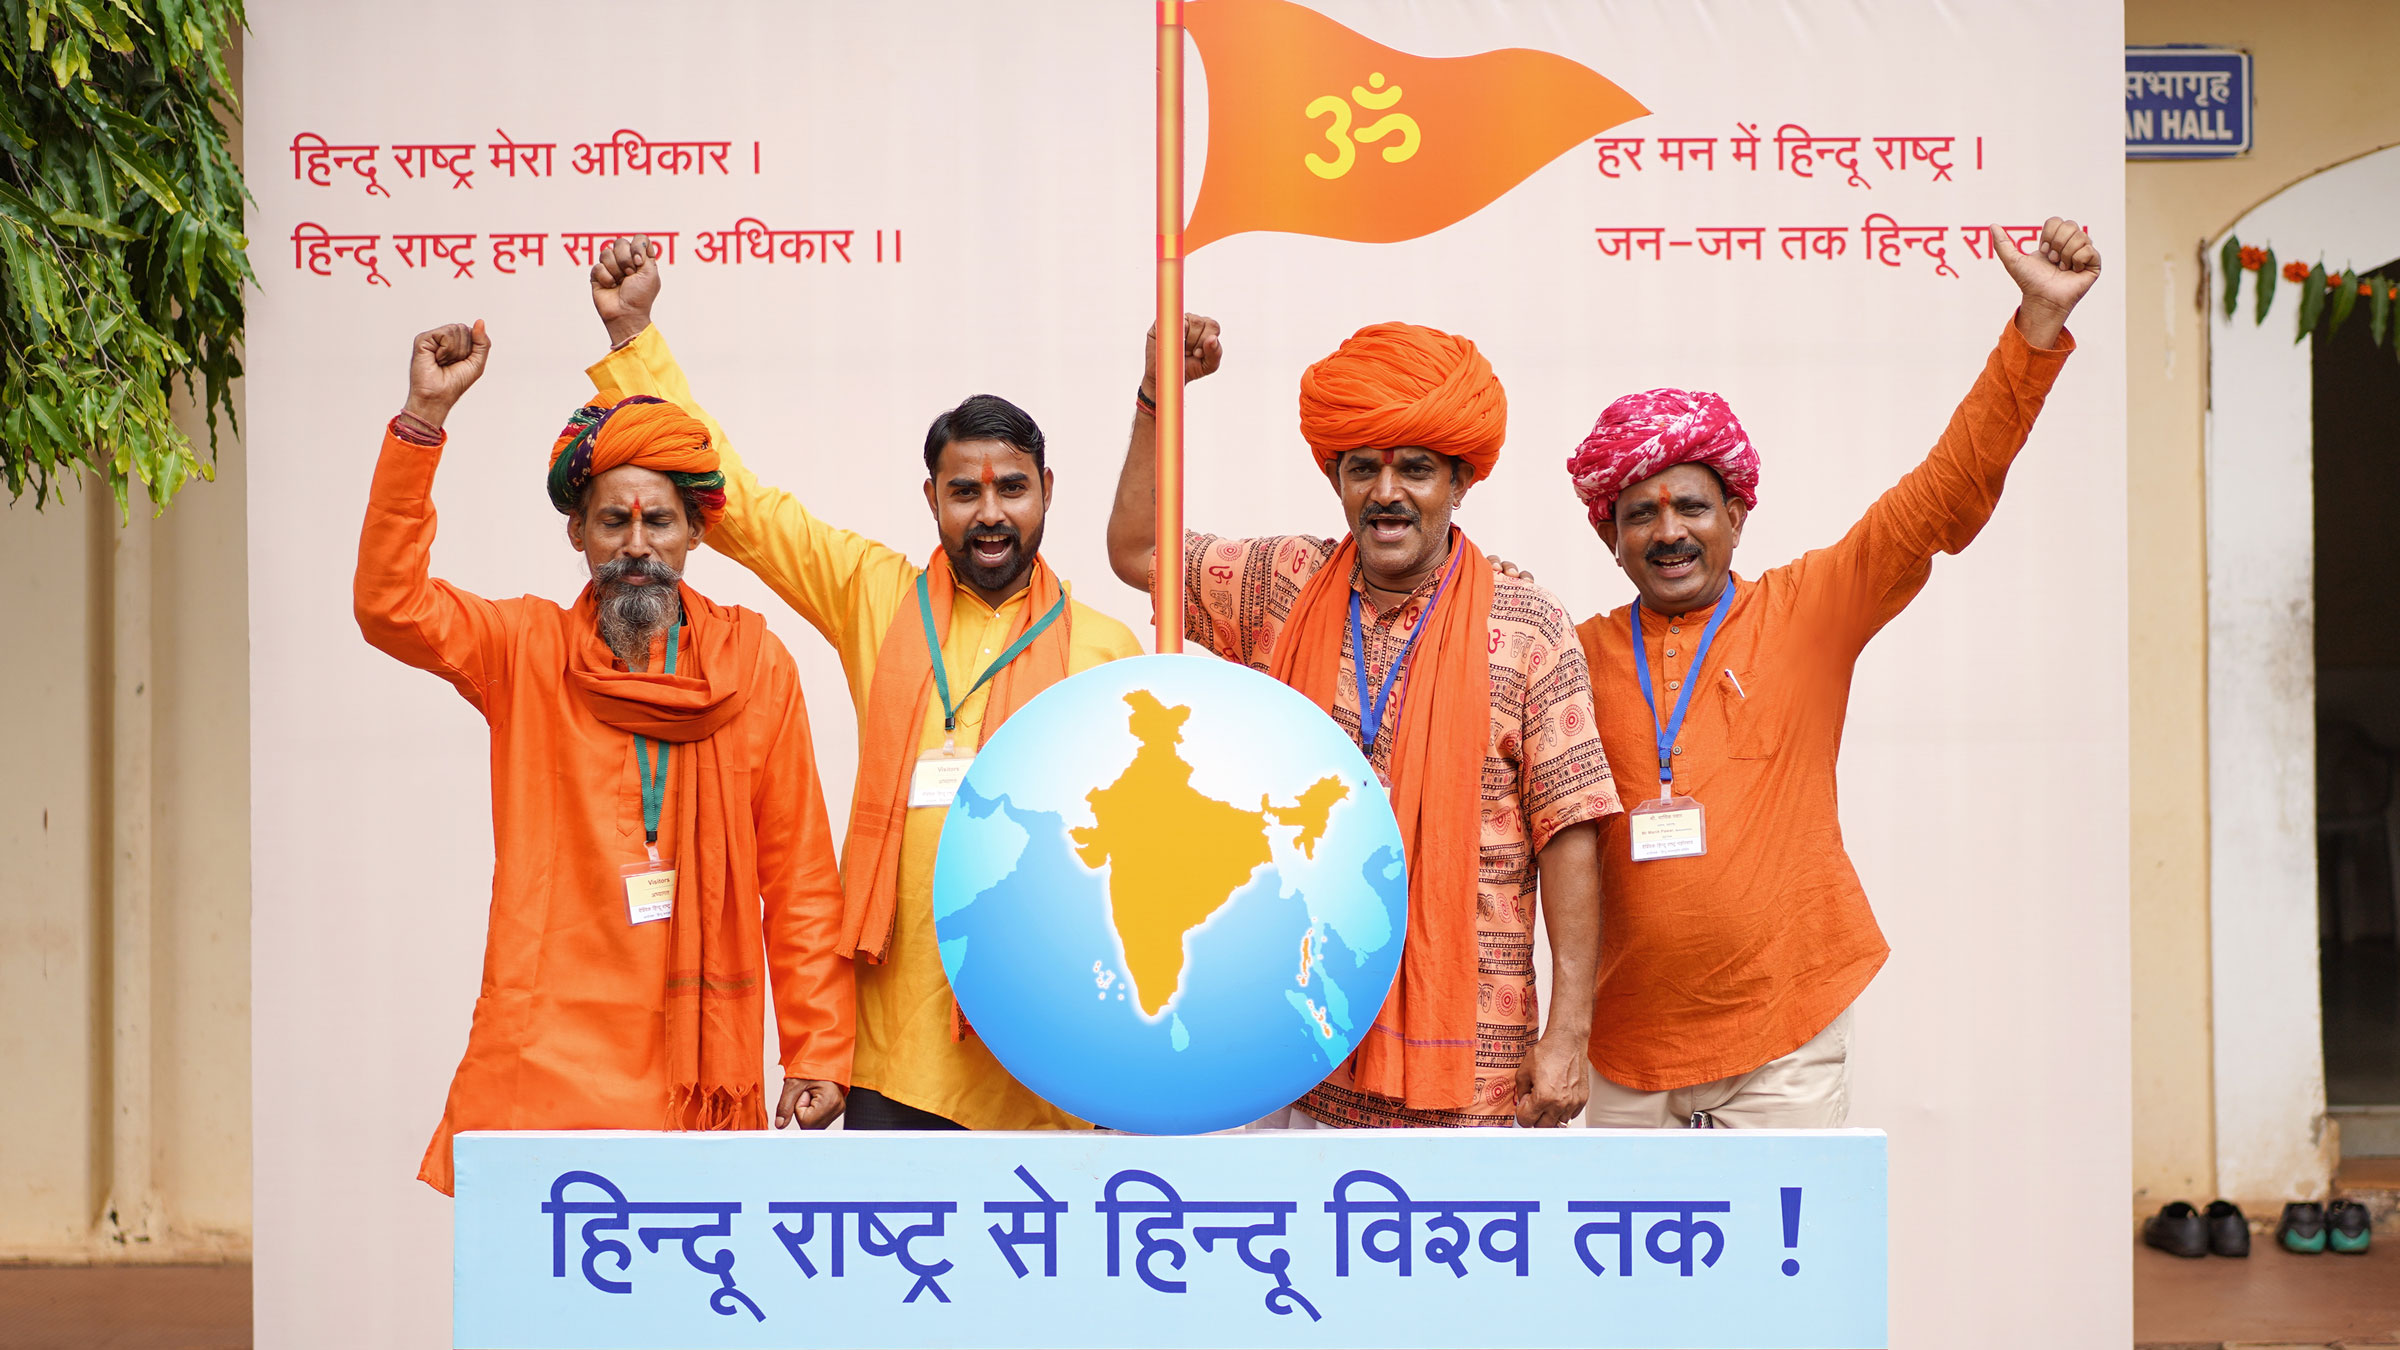 The 'Hindu Rashtra' is our birthright, we hail its ascendence !